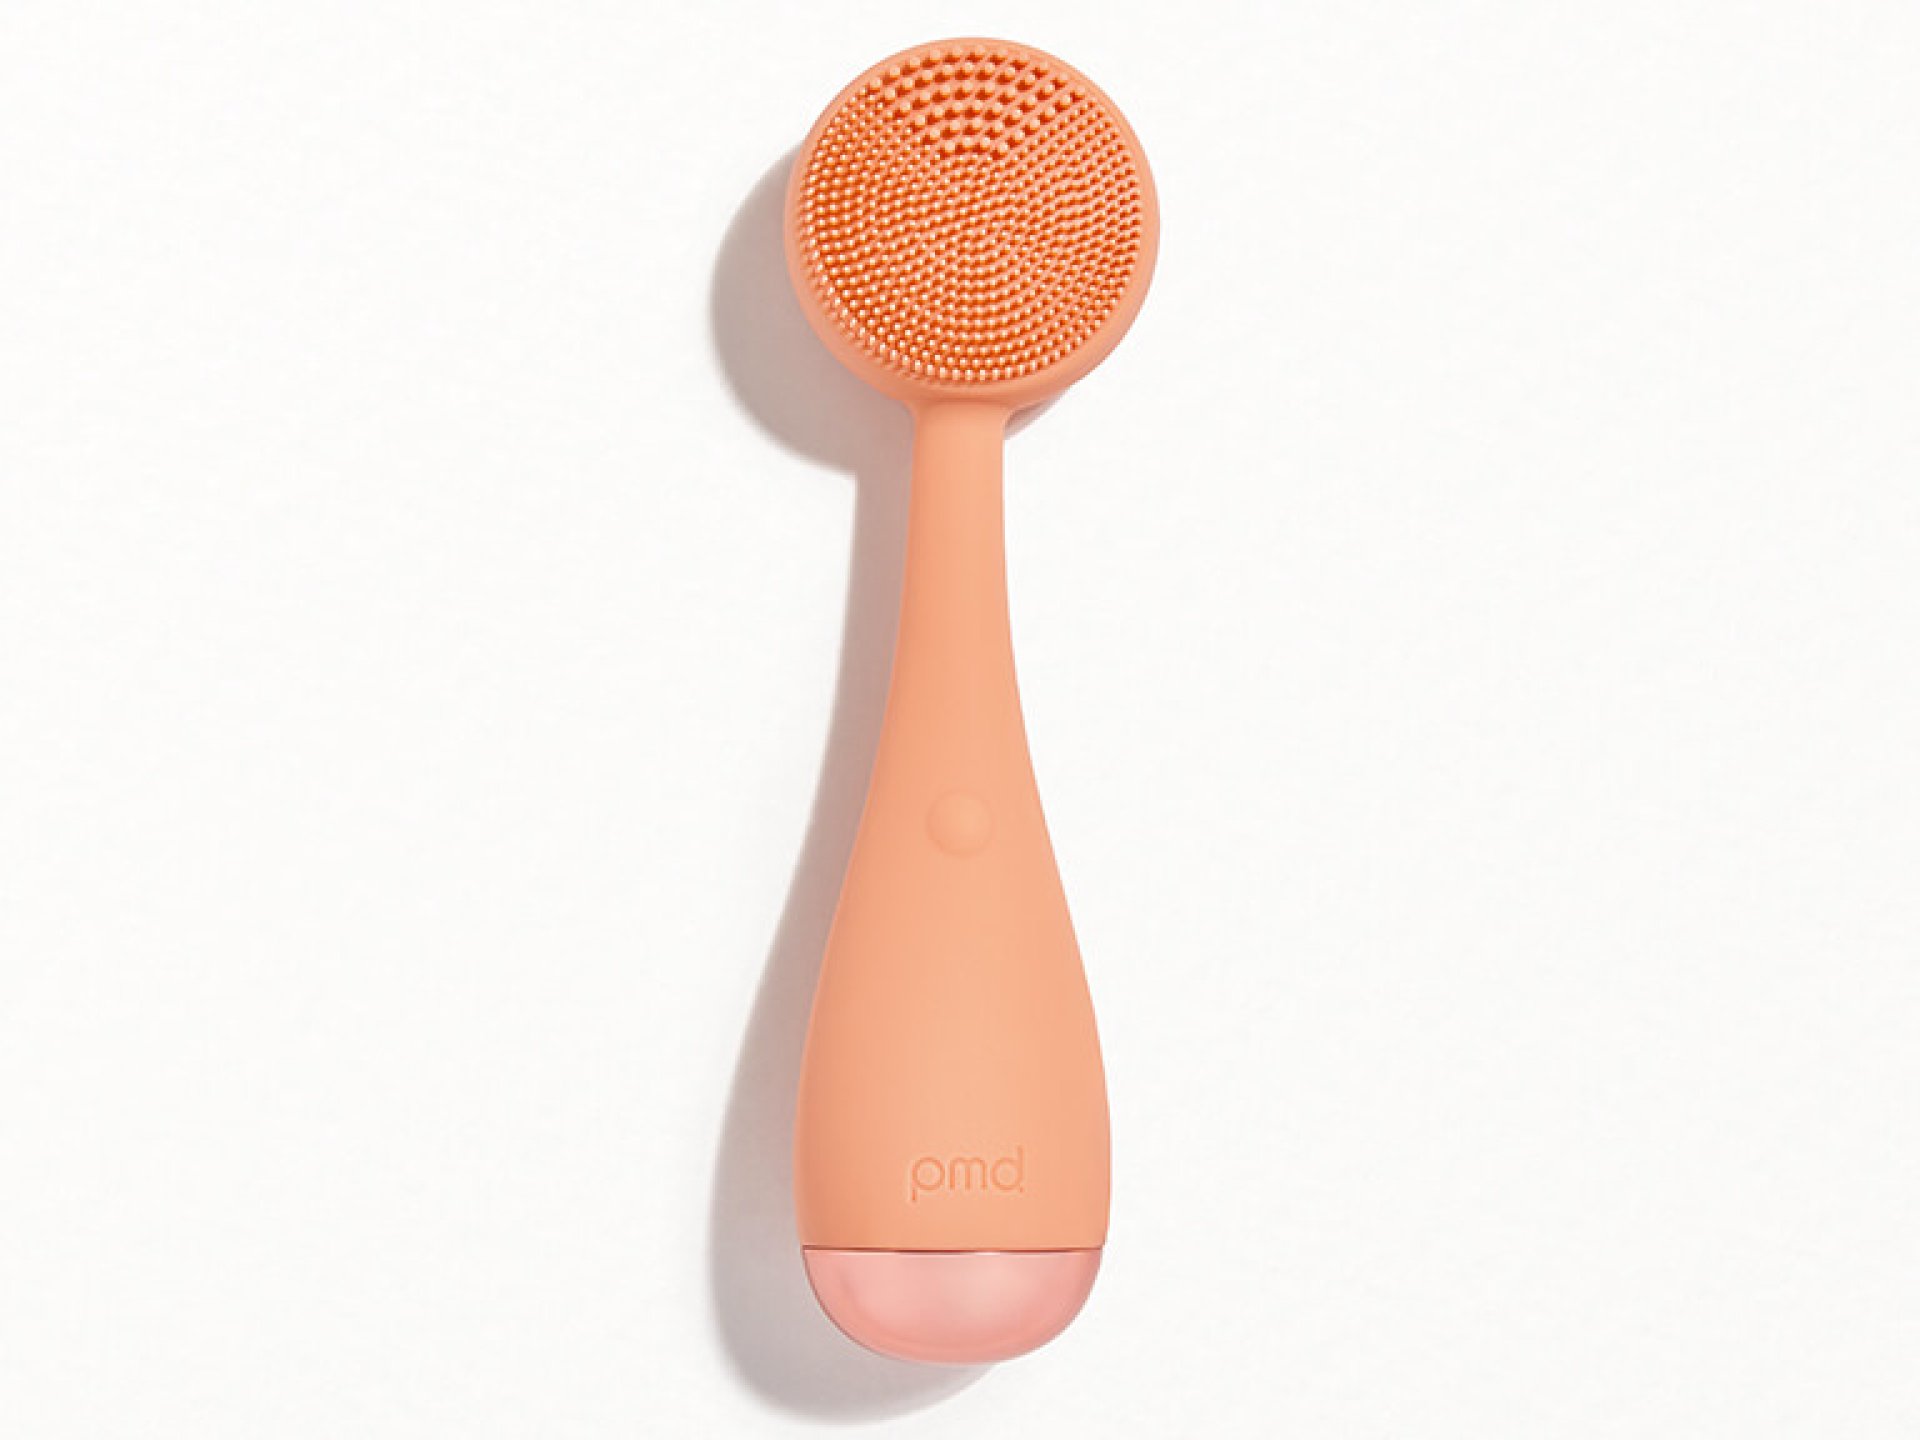 PMD Clean Smart Facial Cleansing Device in Warmth